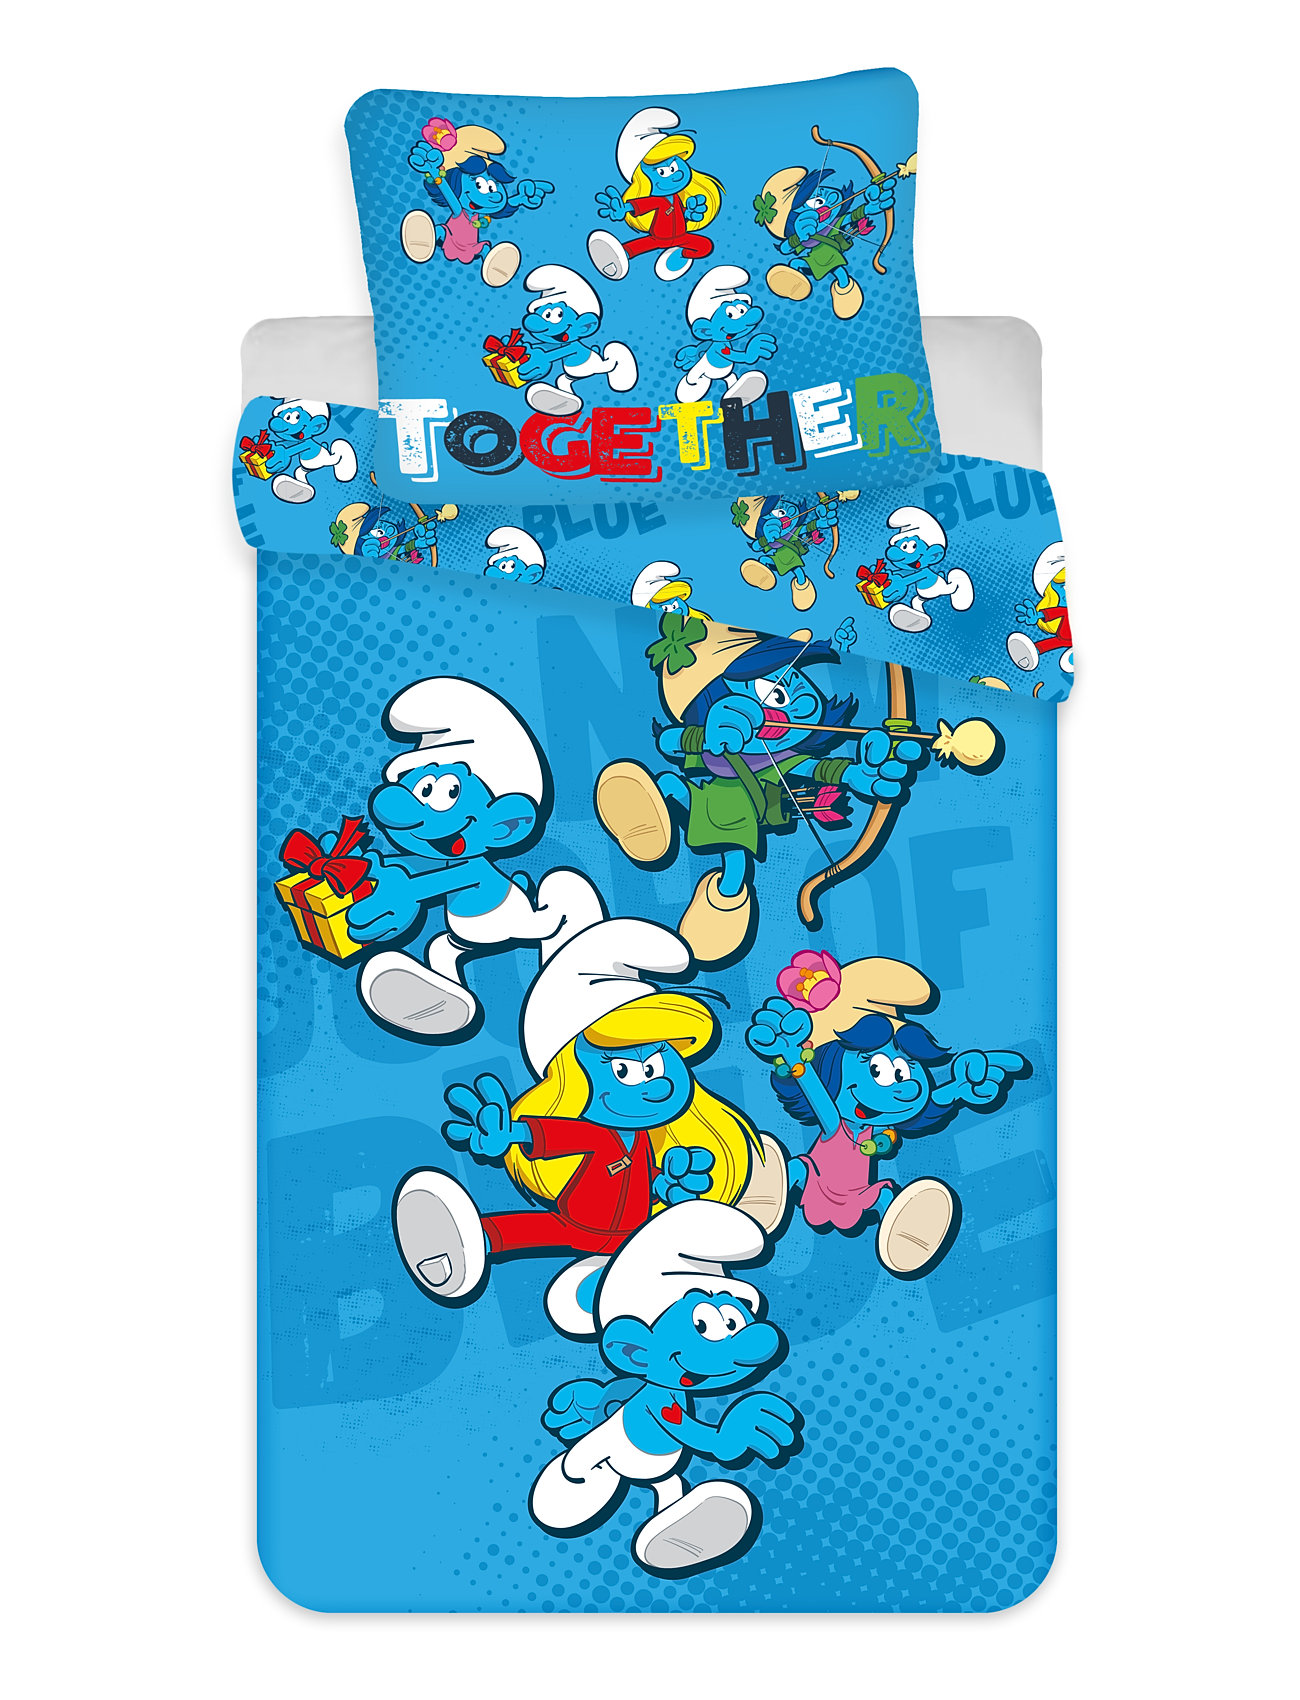 Bed Linen The Smurfs Ts 1002 Home Sleep Time Bed Sets Multi/patterned BrandMac